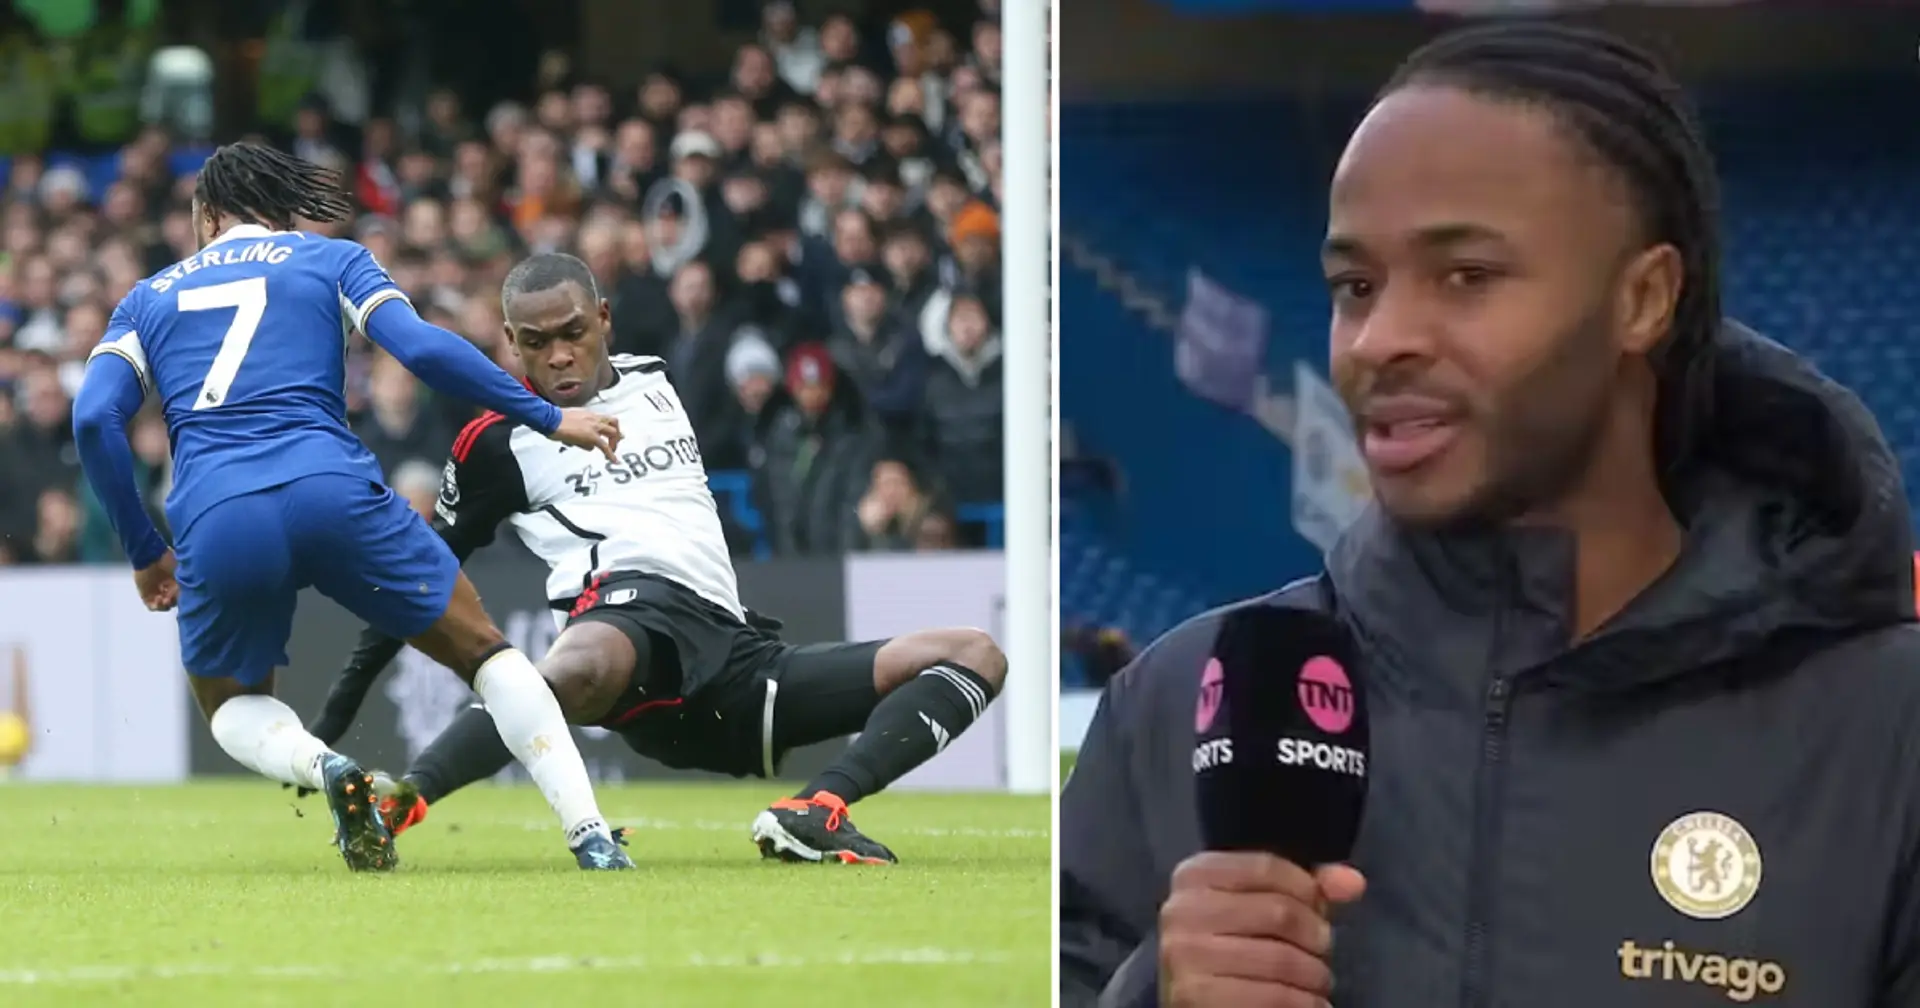 'It’s about quick feet and sharp turns': Raheem Sterling on winning penalty v Fulham